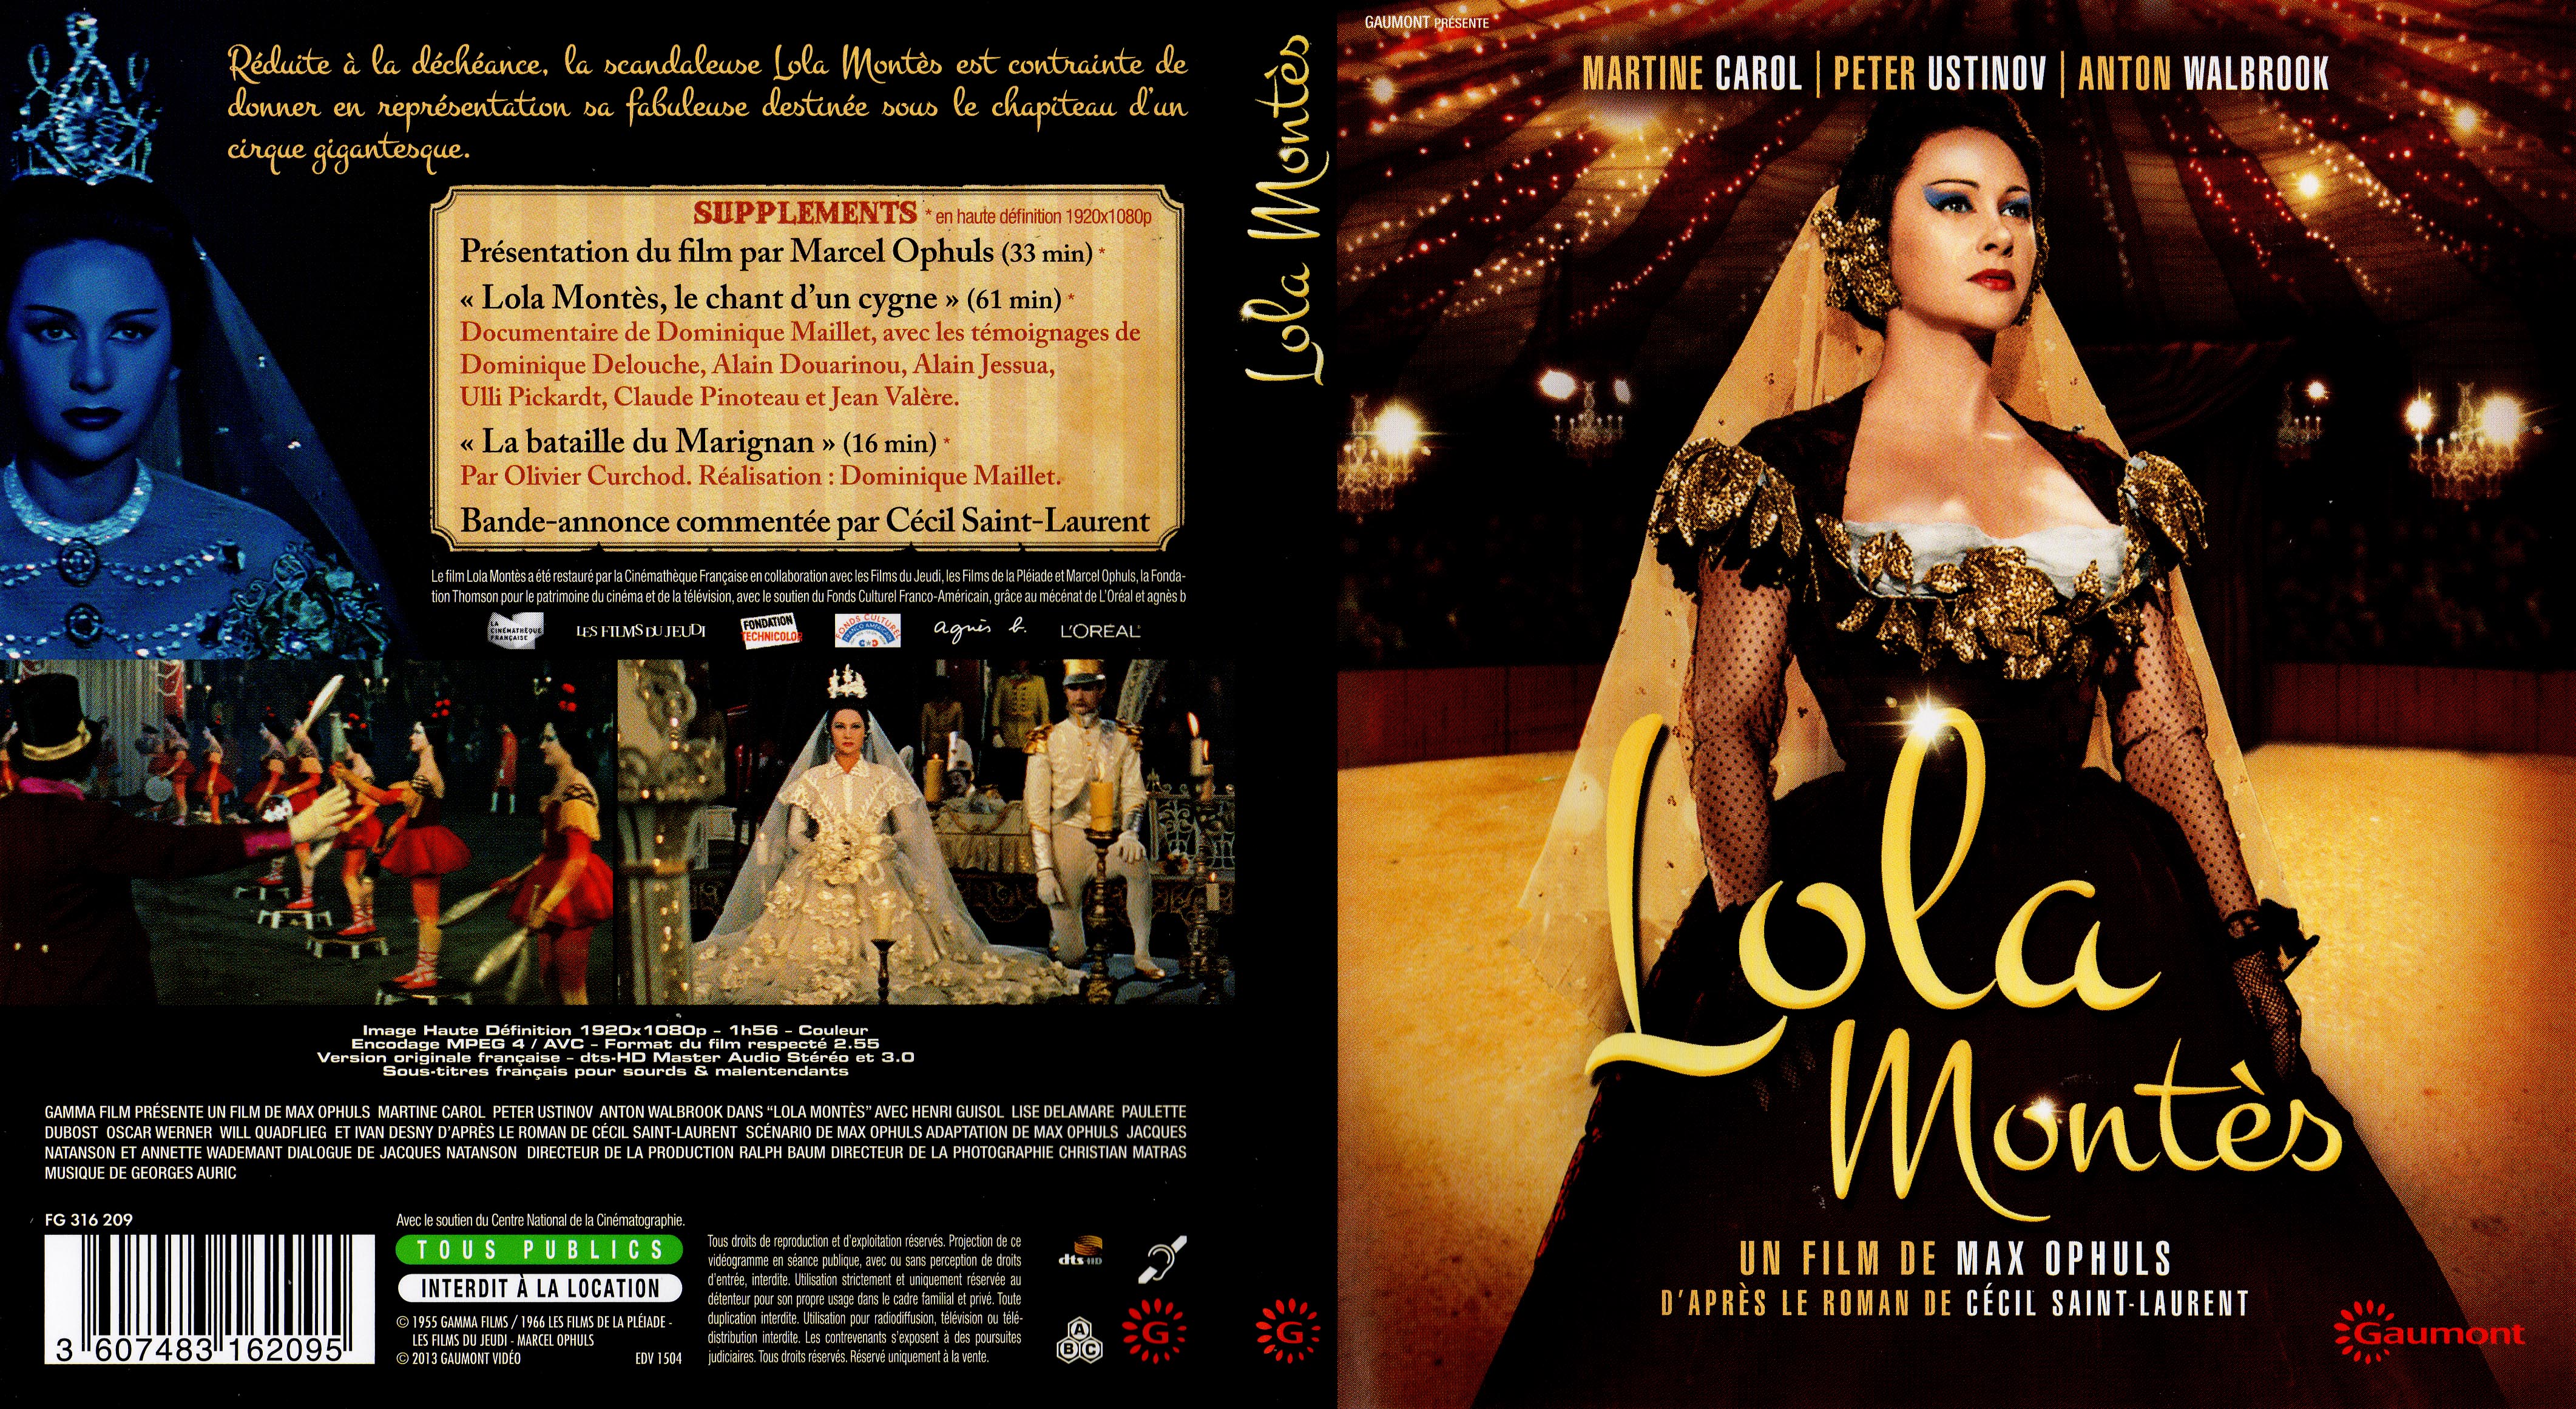 Jaquette DVD Lola Montes (BLU-RAY)